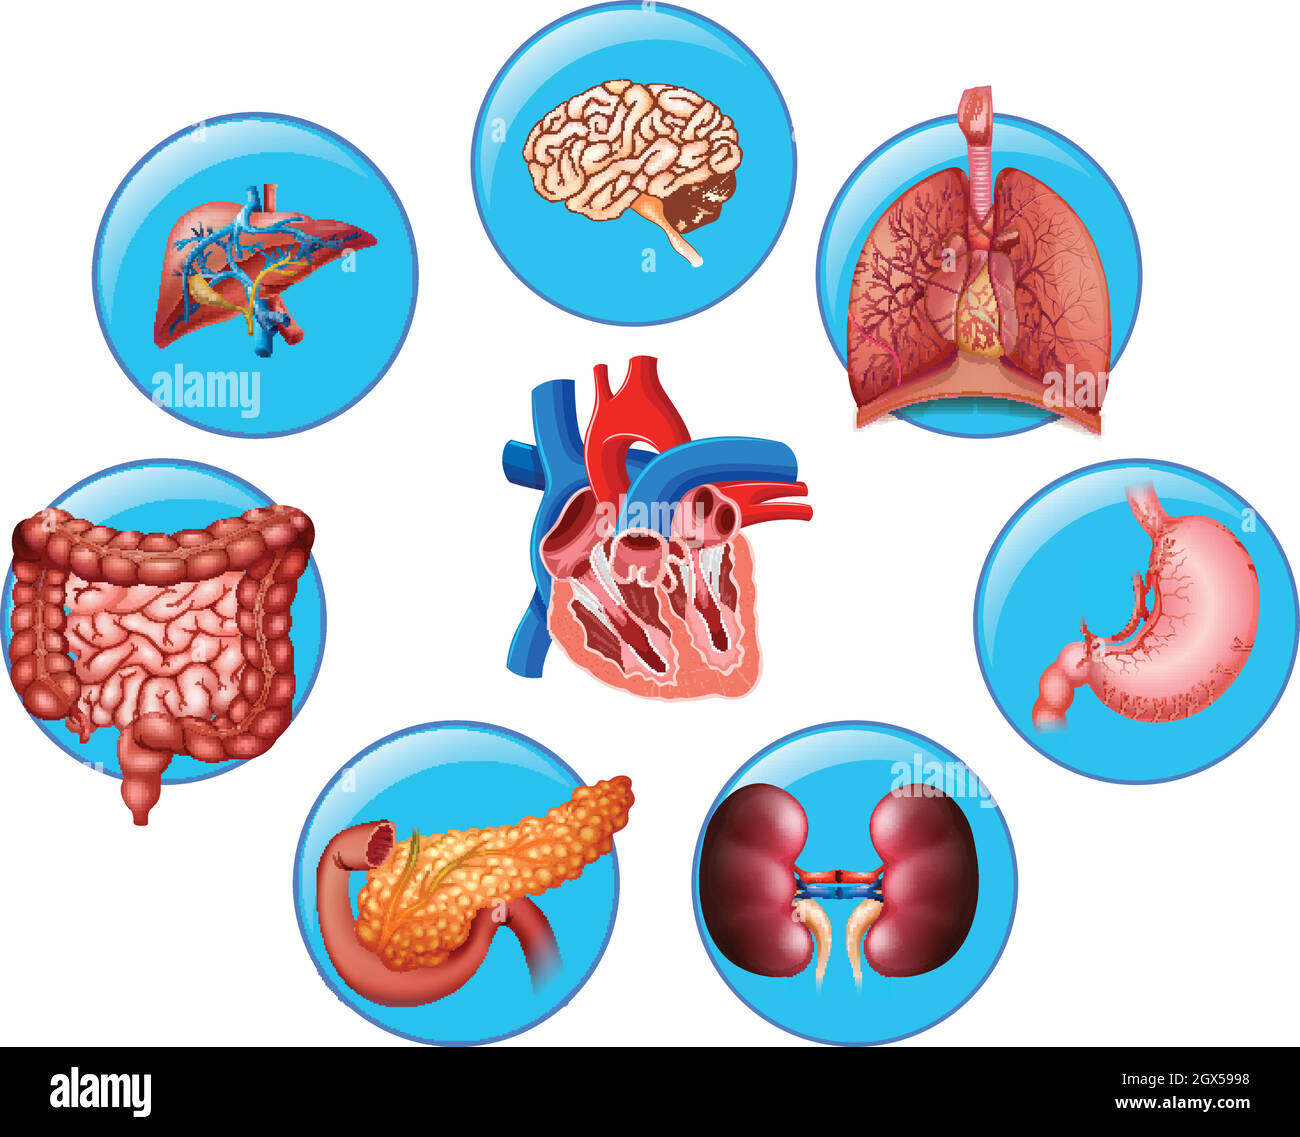 Diagram showing different human parts Stock Vector